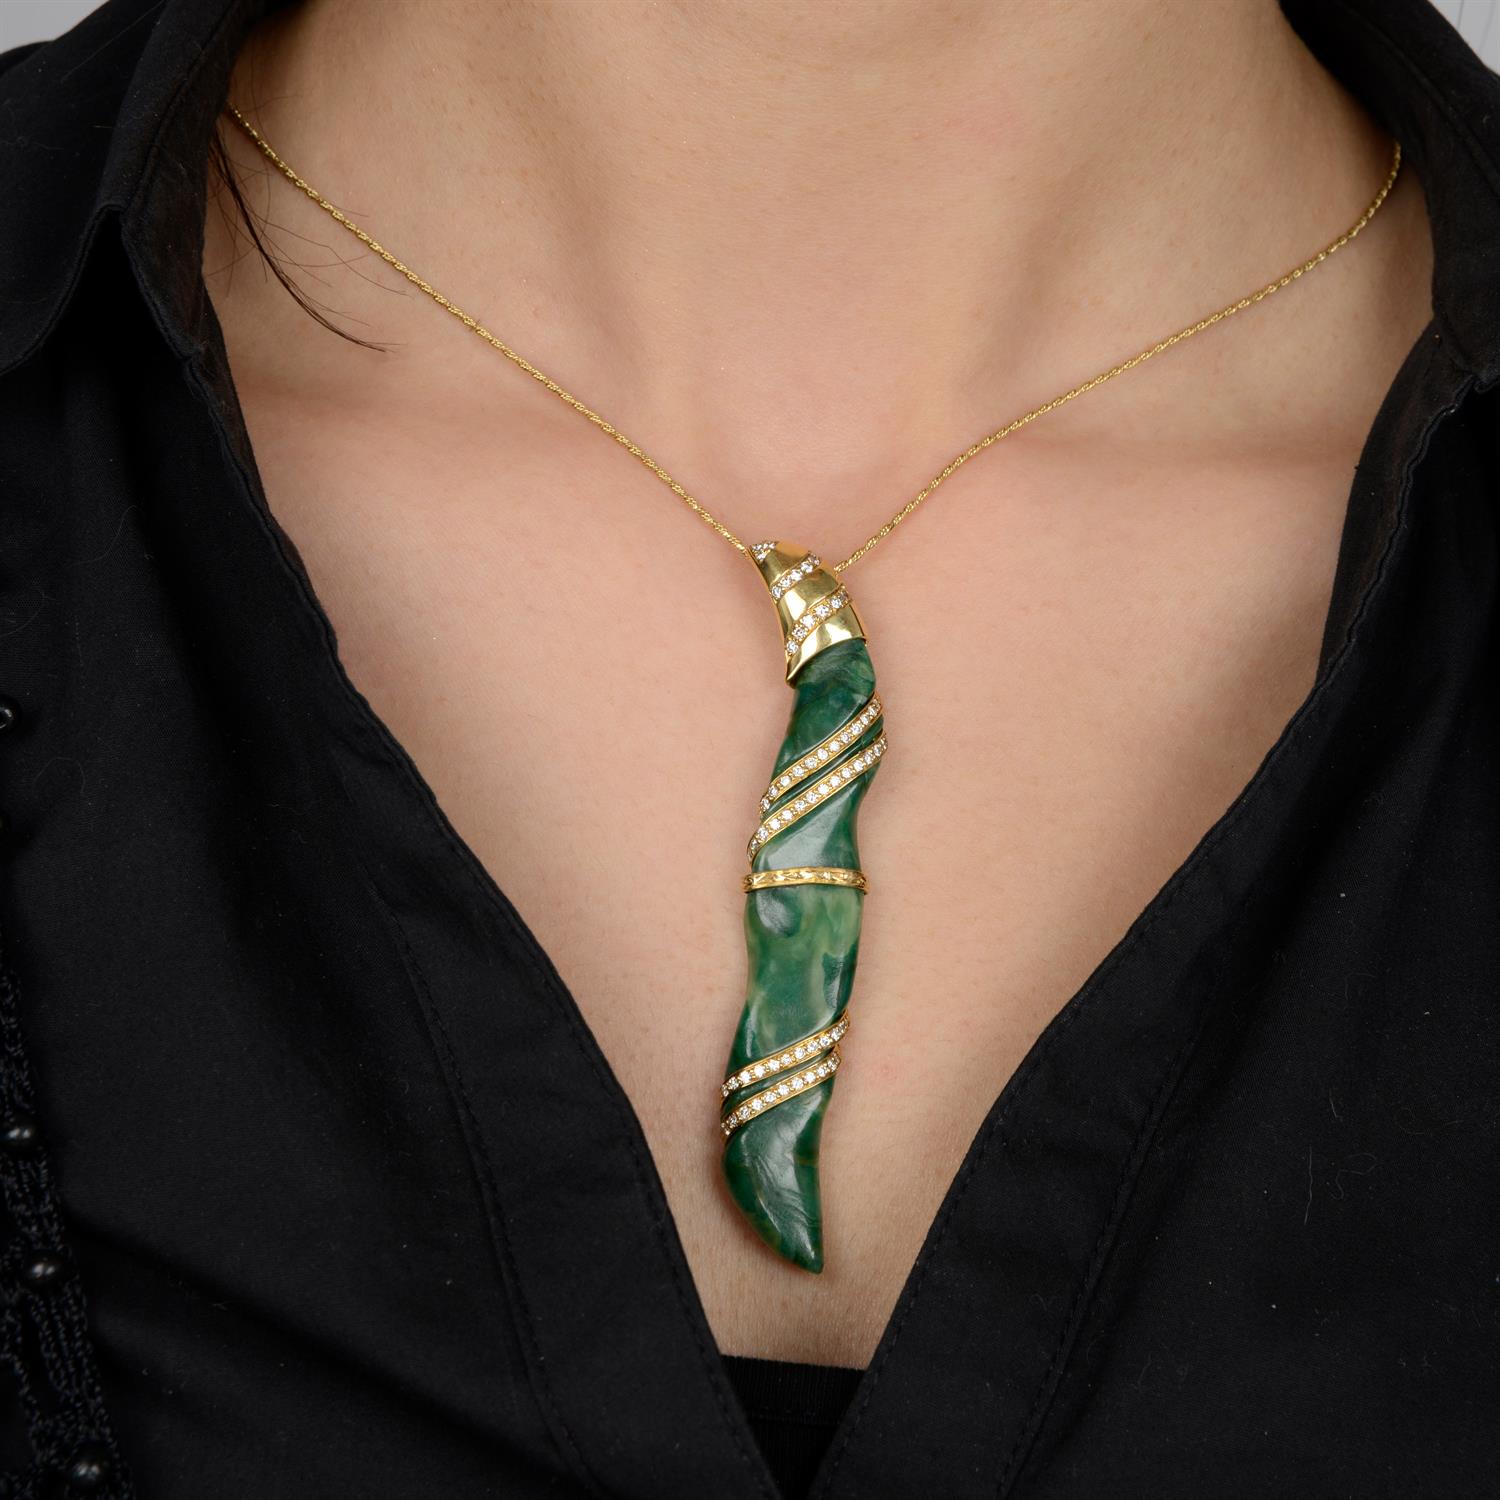 18ct gold diamond and green stone pendant, with chain - Image 5 of 5